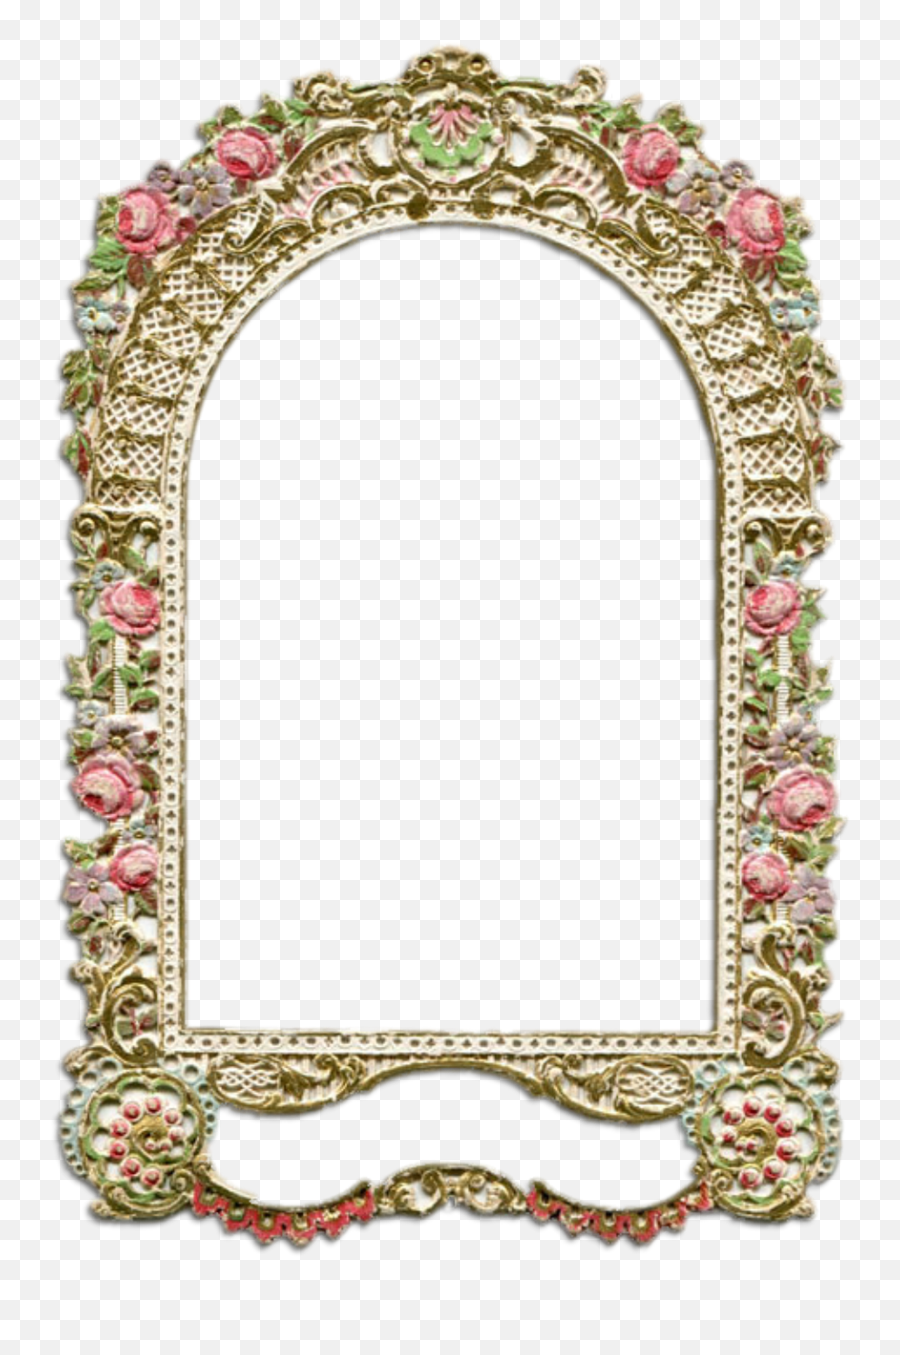 Download Ornate Vintage Frame - Am Happy With Allah As My Lord Emoji,Ornate Frame Png